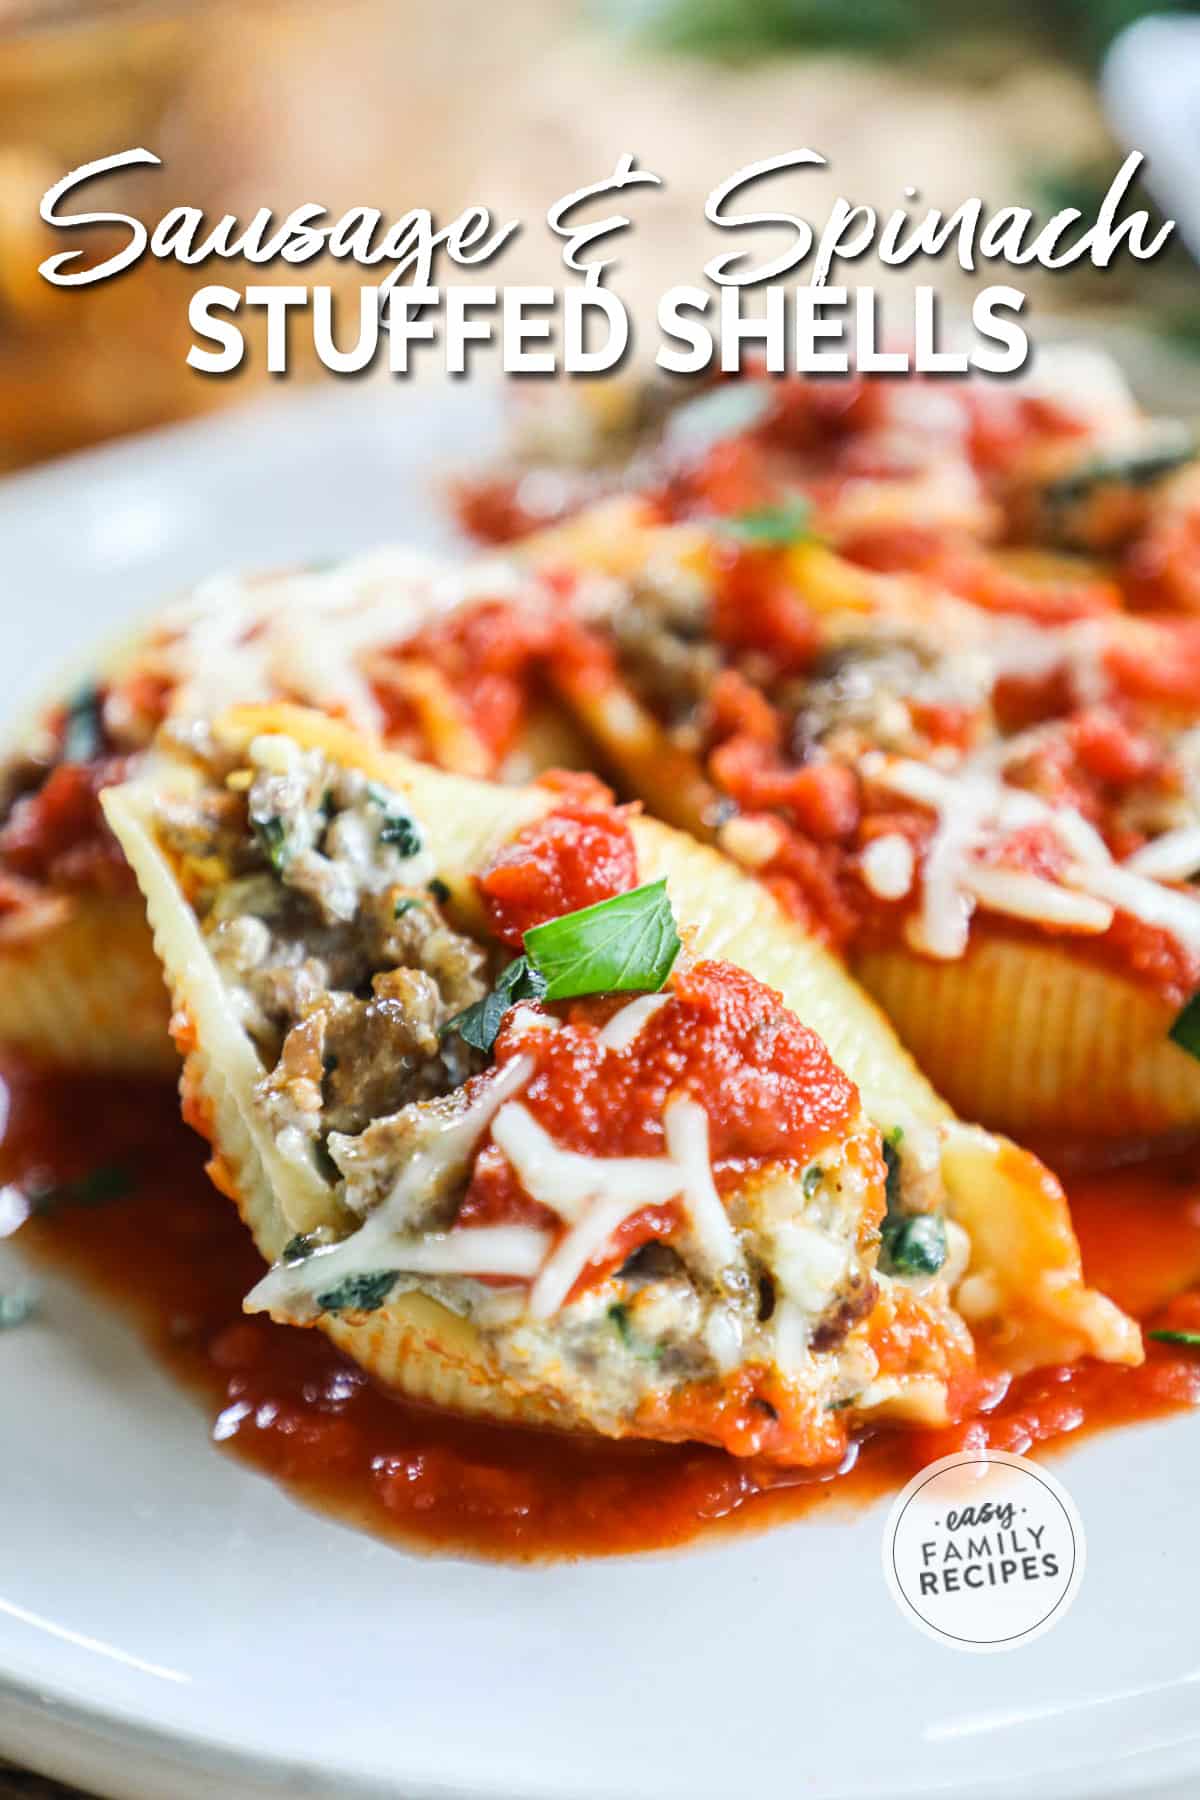 large pasta shells with a sausage spinach filling on a plate.